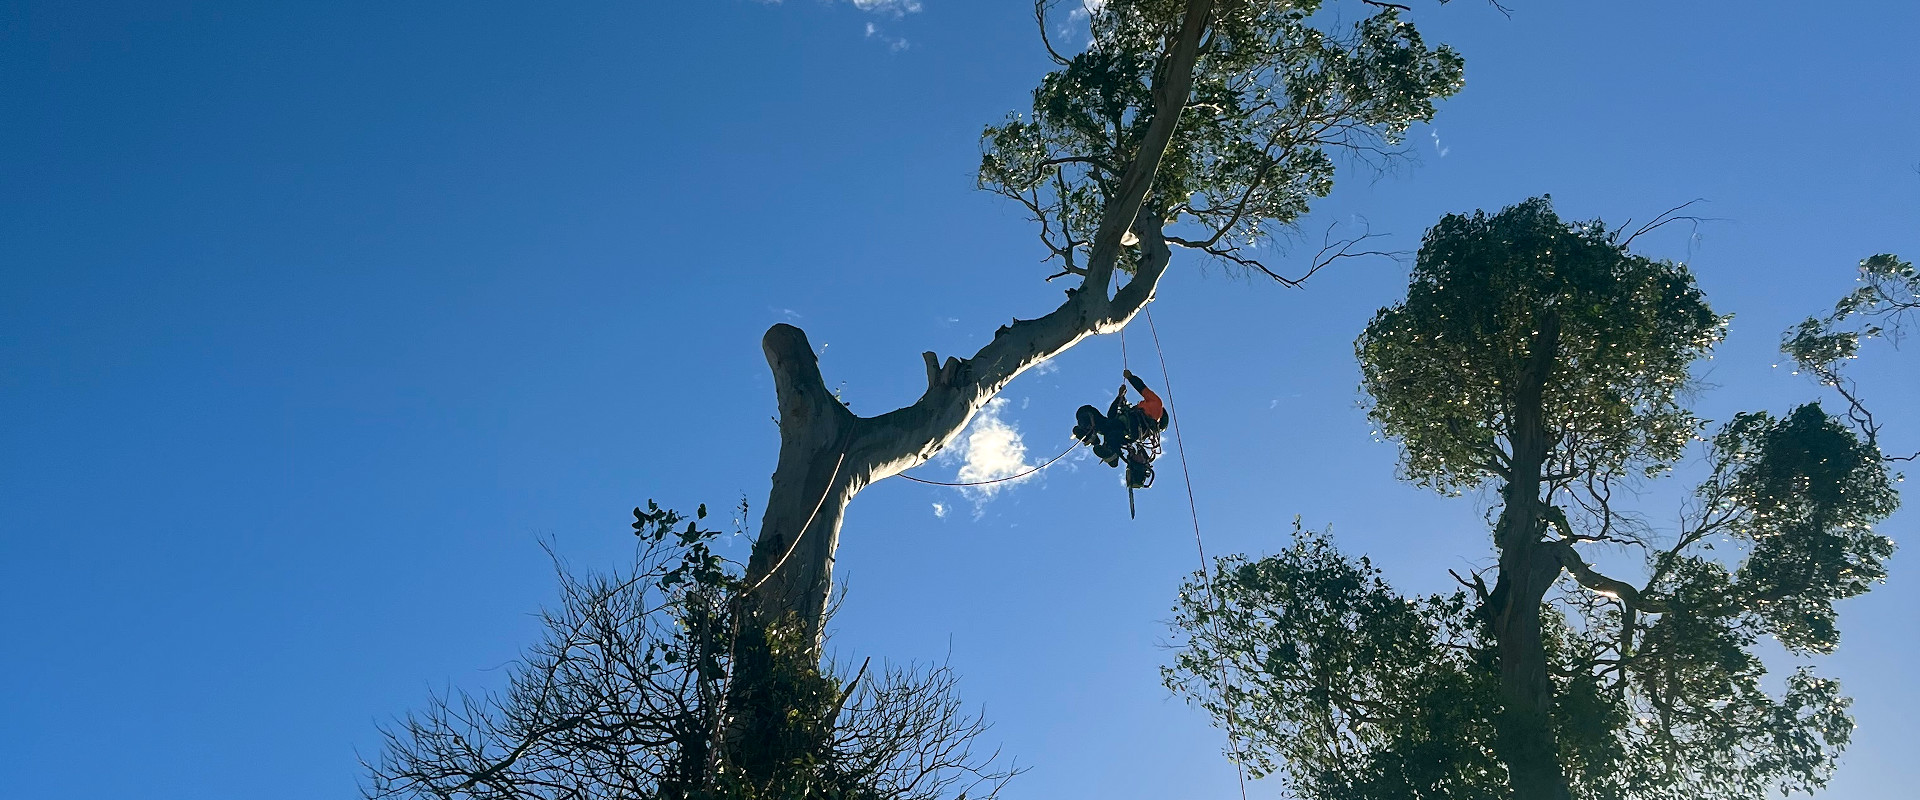 Beneficial Tree Care arborist suspended from an Australian tree.